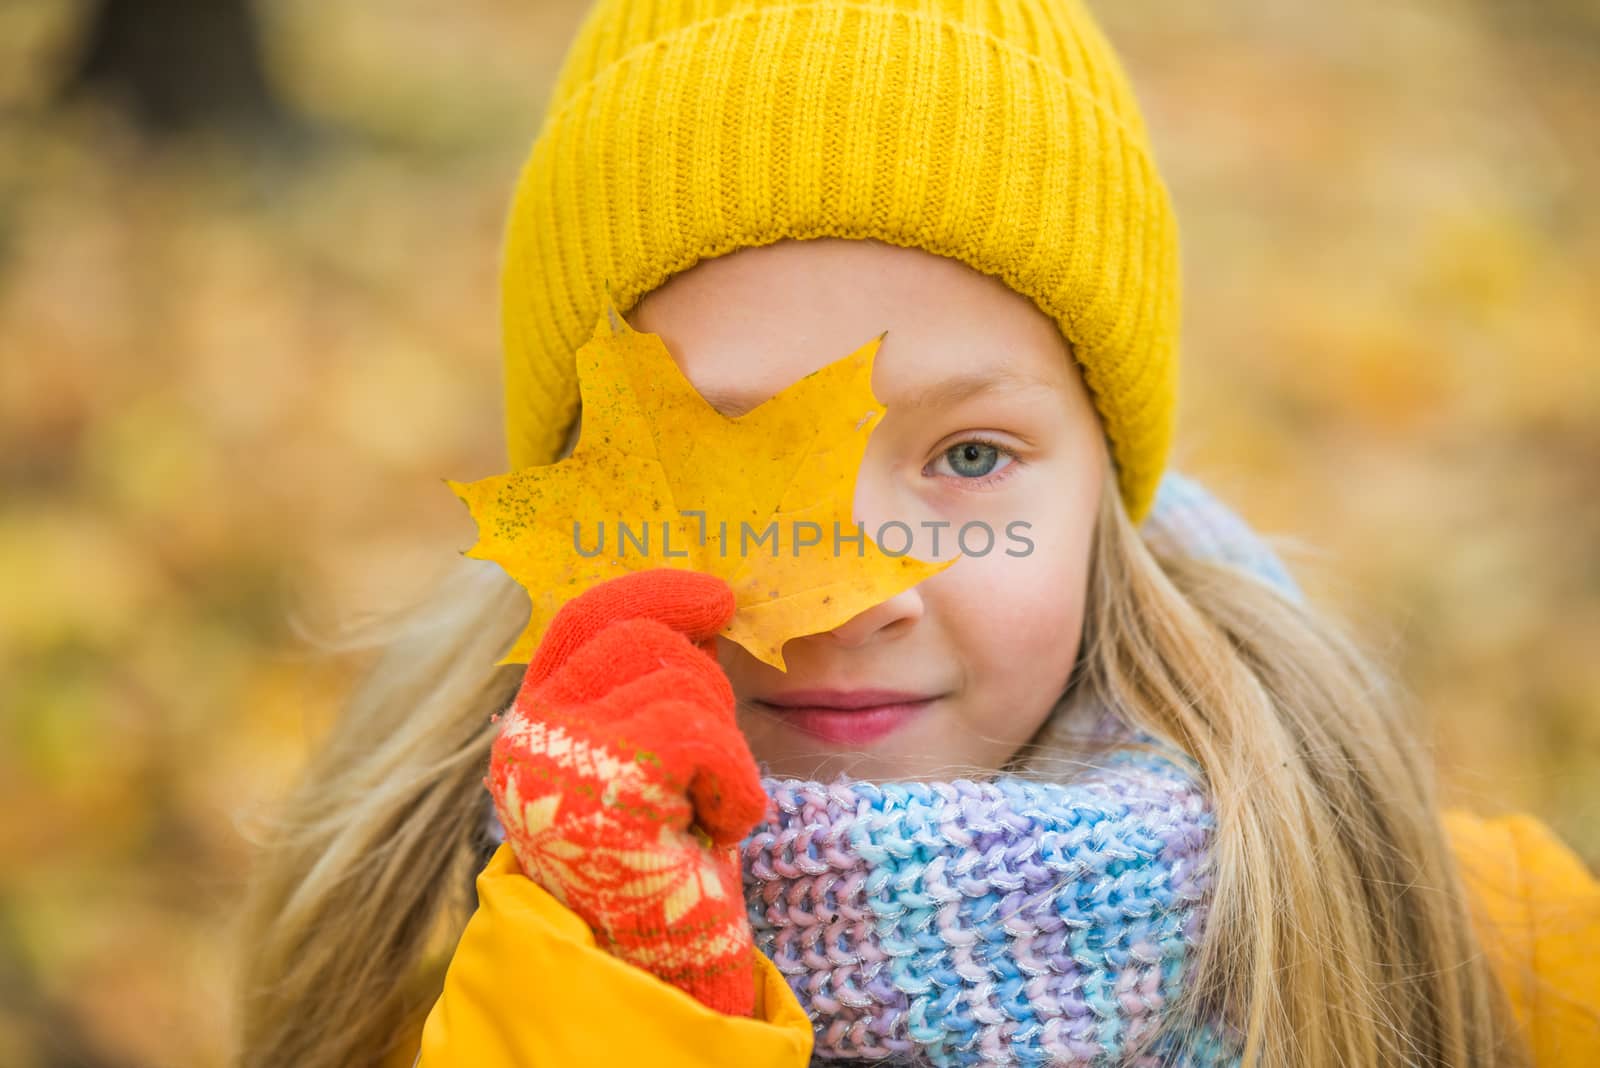 Little girl with blond hair in autumn background by infinityyy